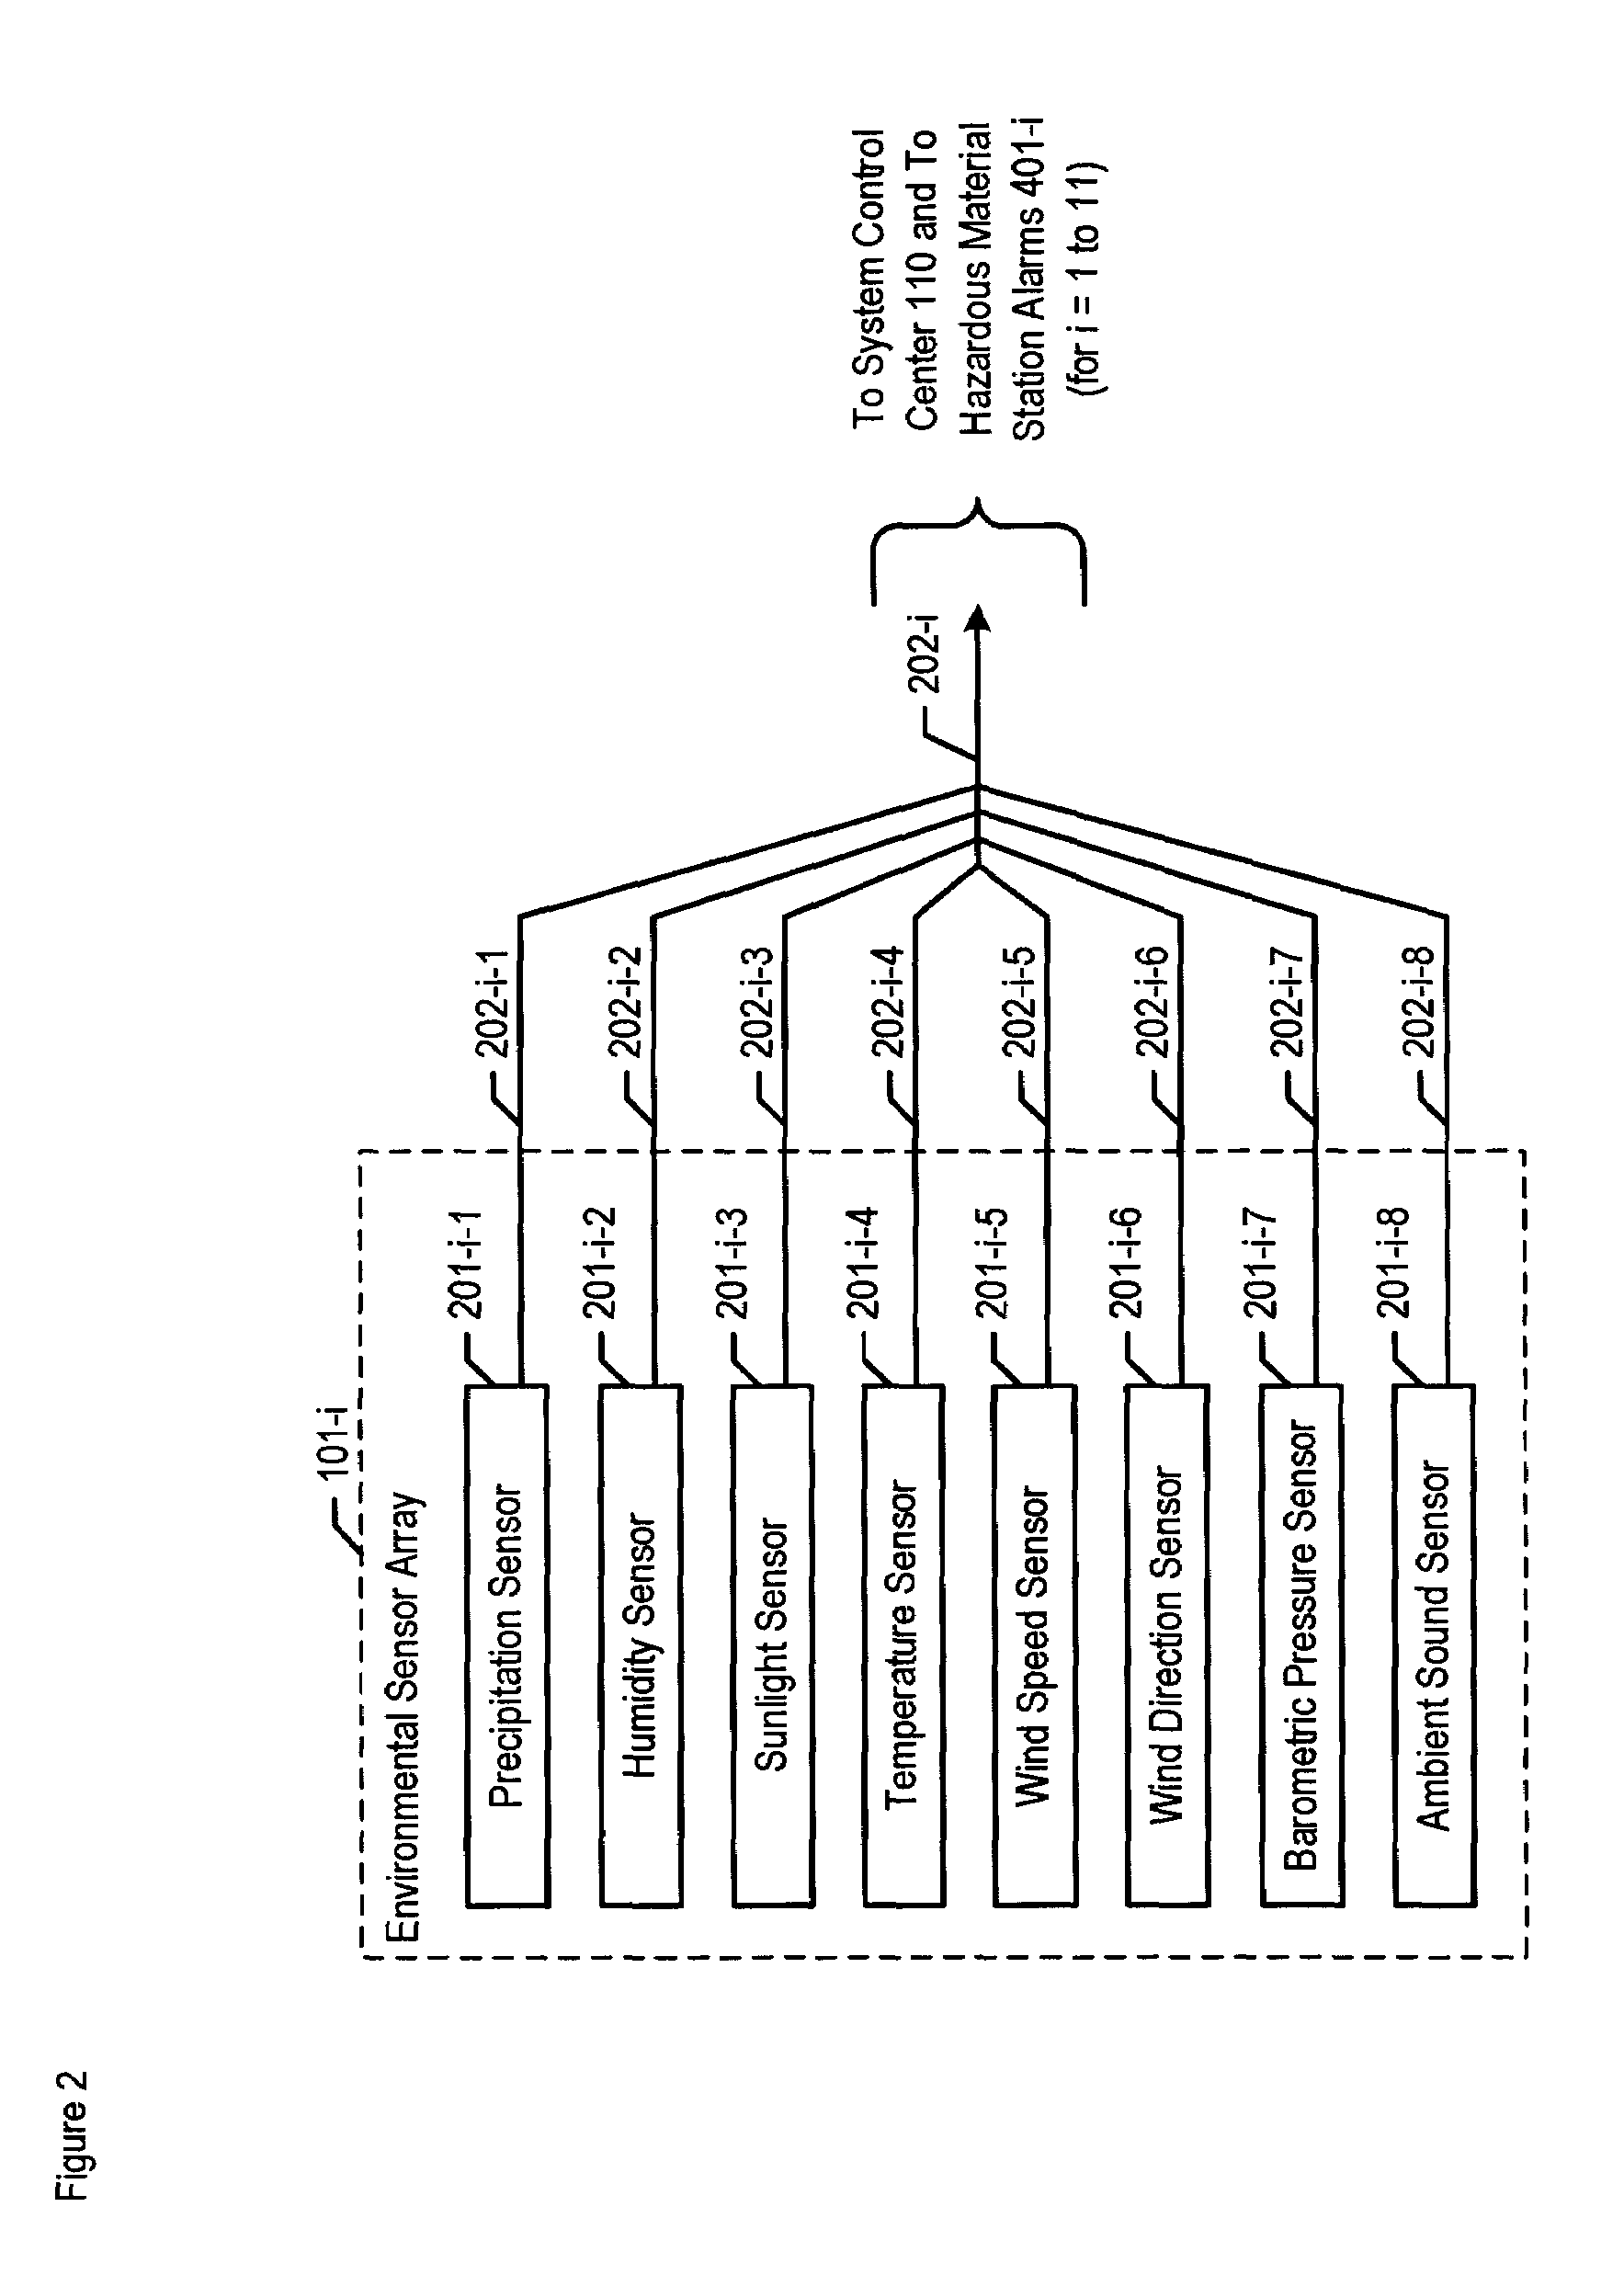 Chemical, biological, radiological, and nuclear weapon detection system with environmental acuity